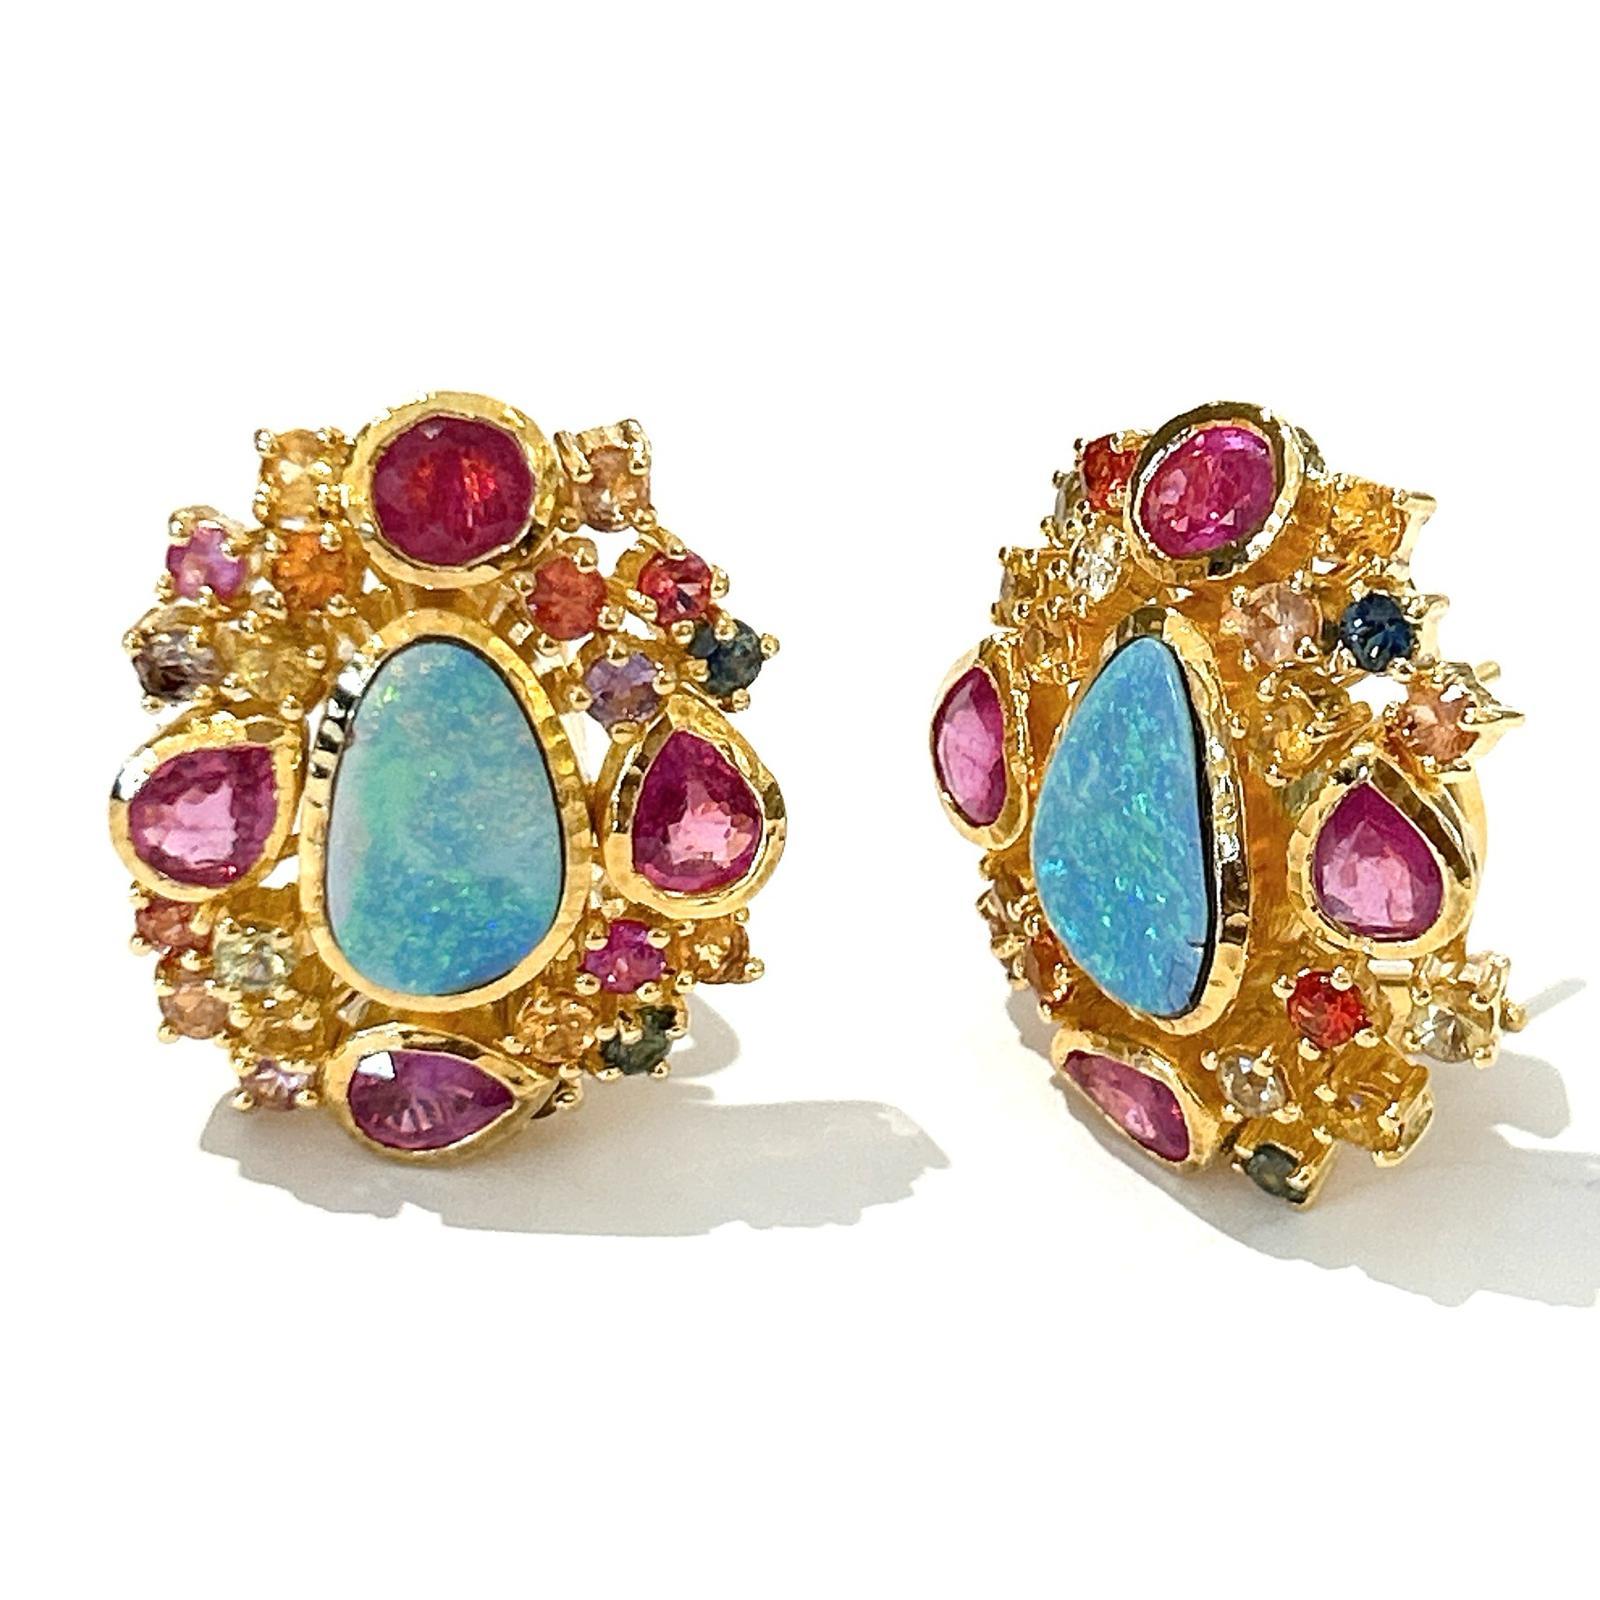 Bochic “Orient” Opal, Ruby, Sapphire & Multi Gem Earrings Set 18K Gold&Silver  In New Condition For Sale In New York, NY